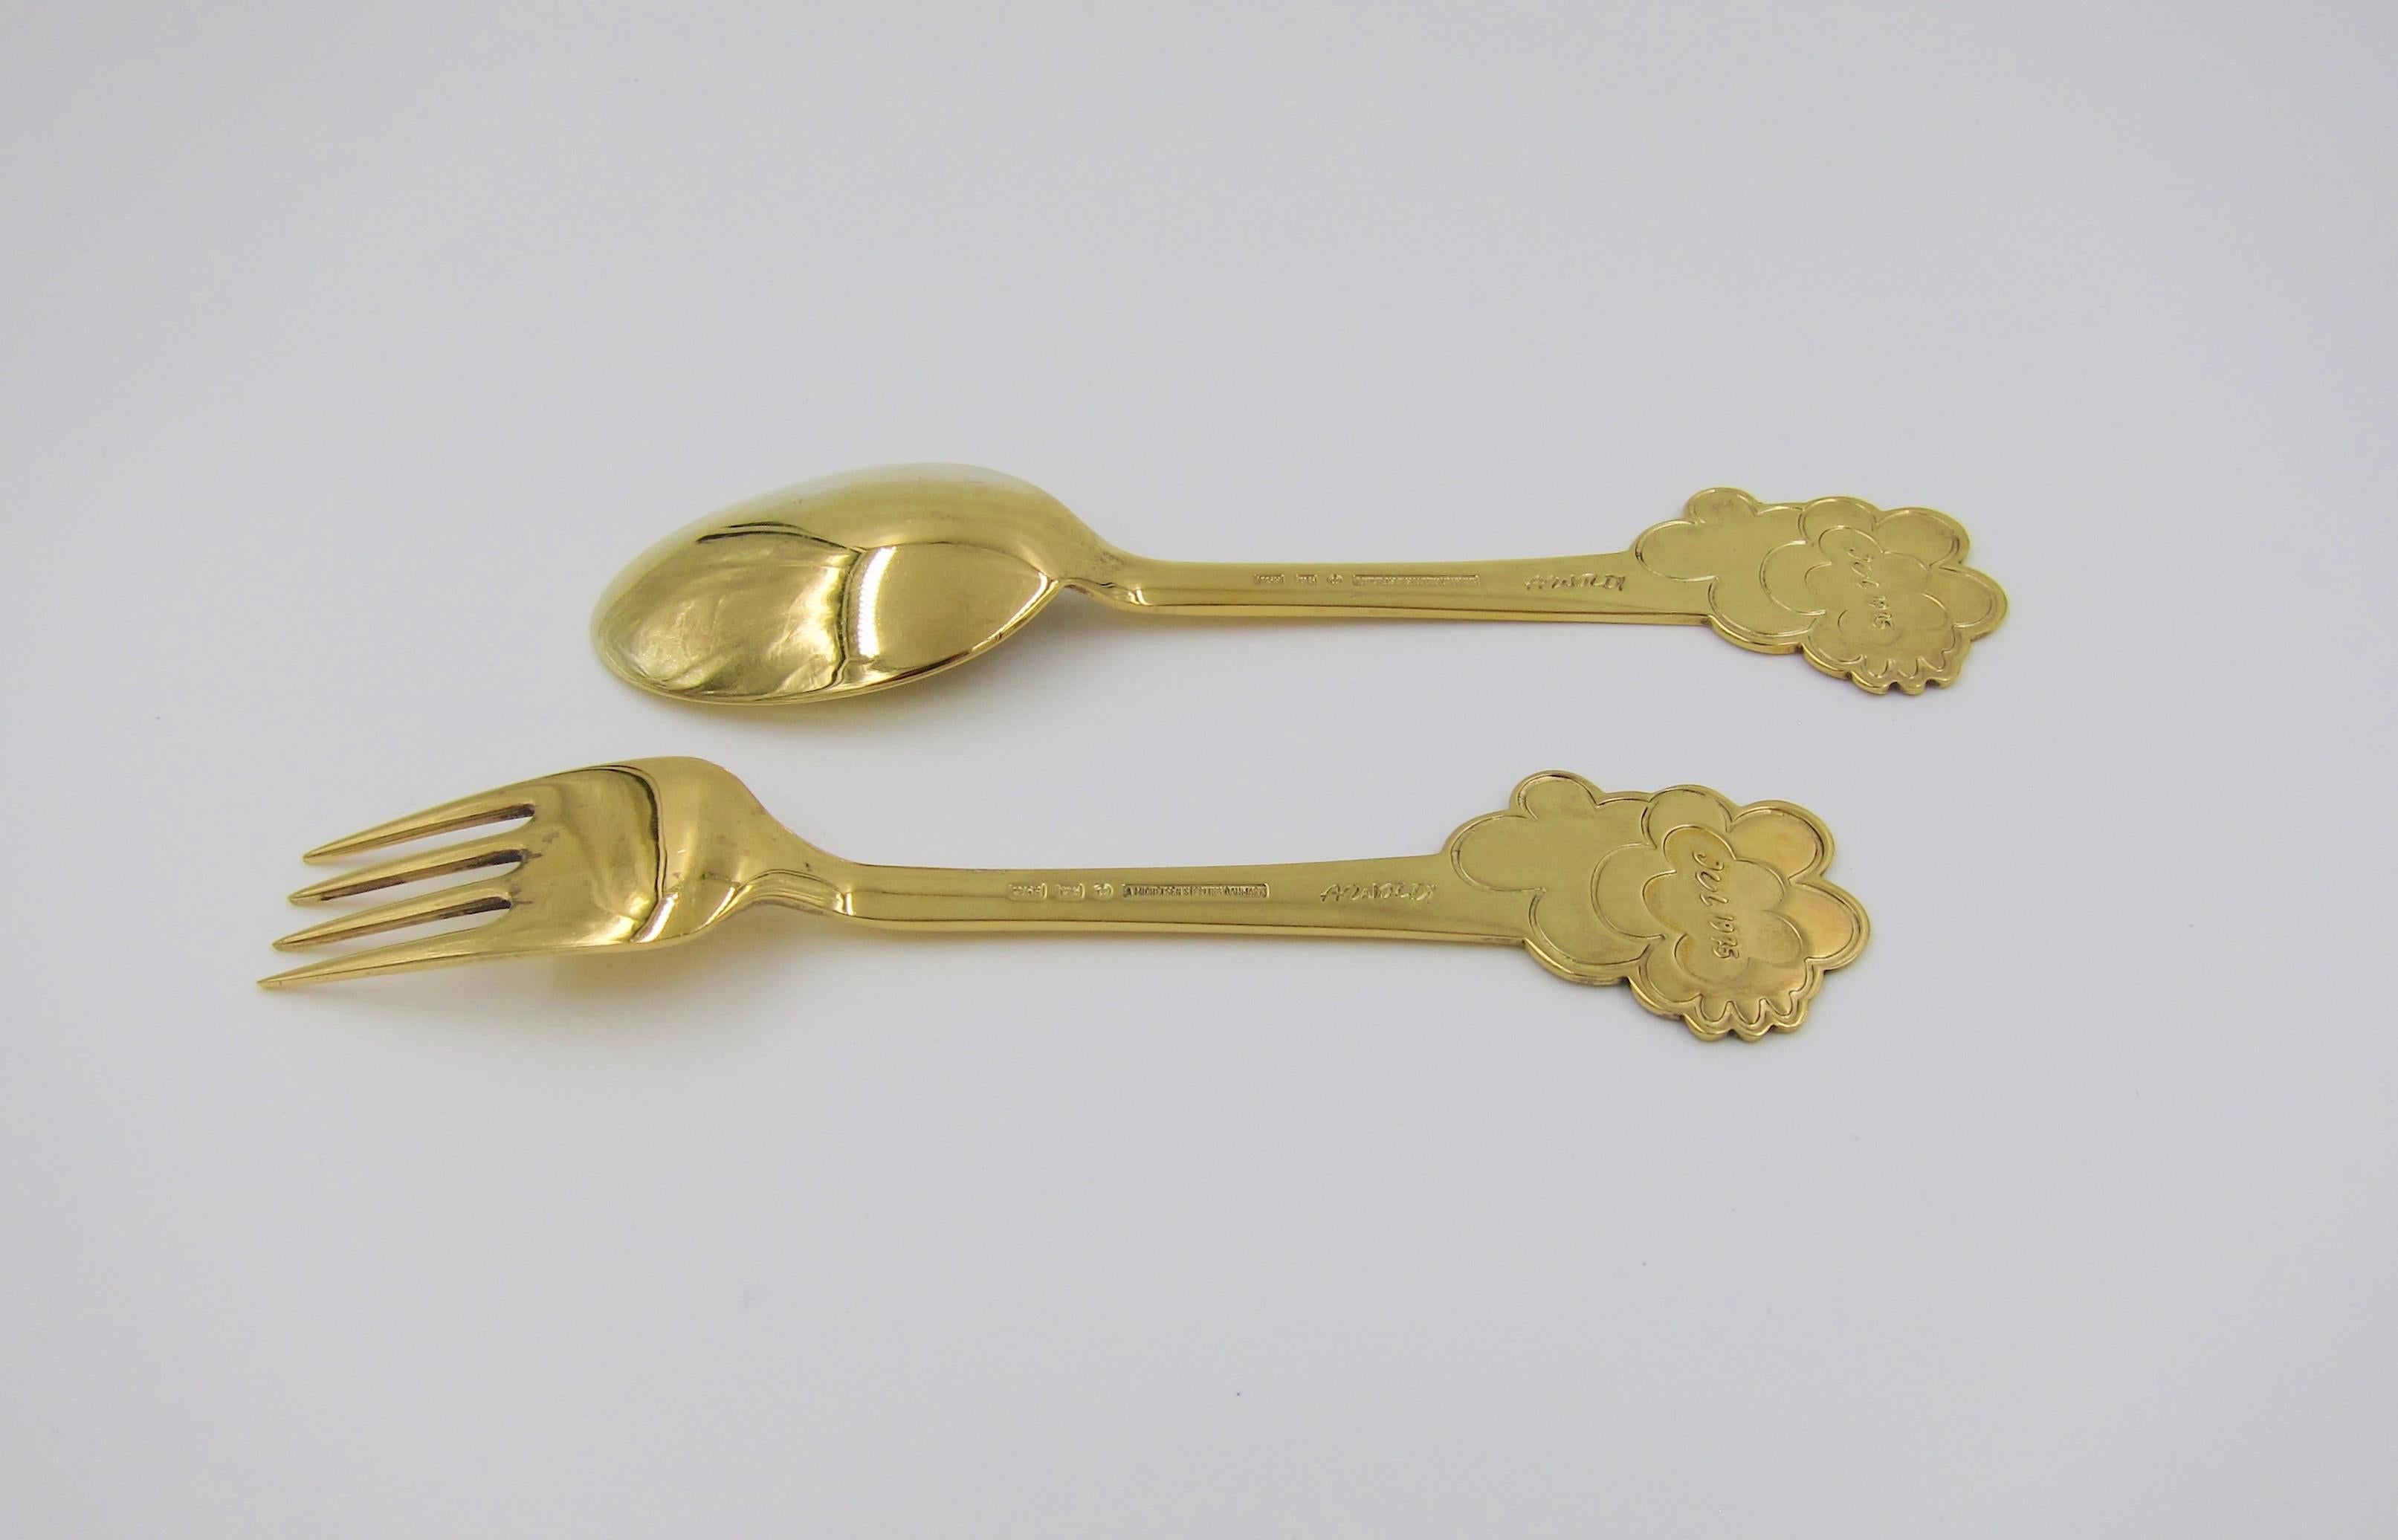 1975 Anton Michelsen Gilded Silver and Enamel Christmas Fork and Spoon Set 2